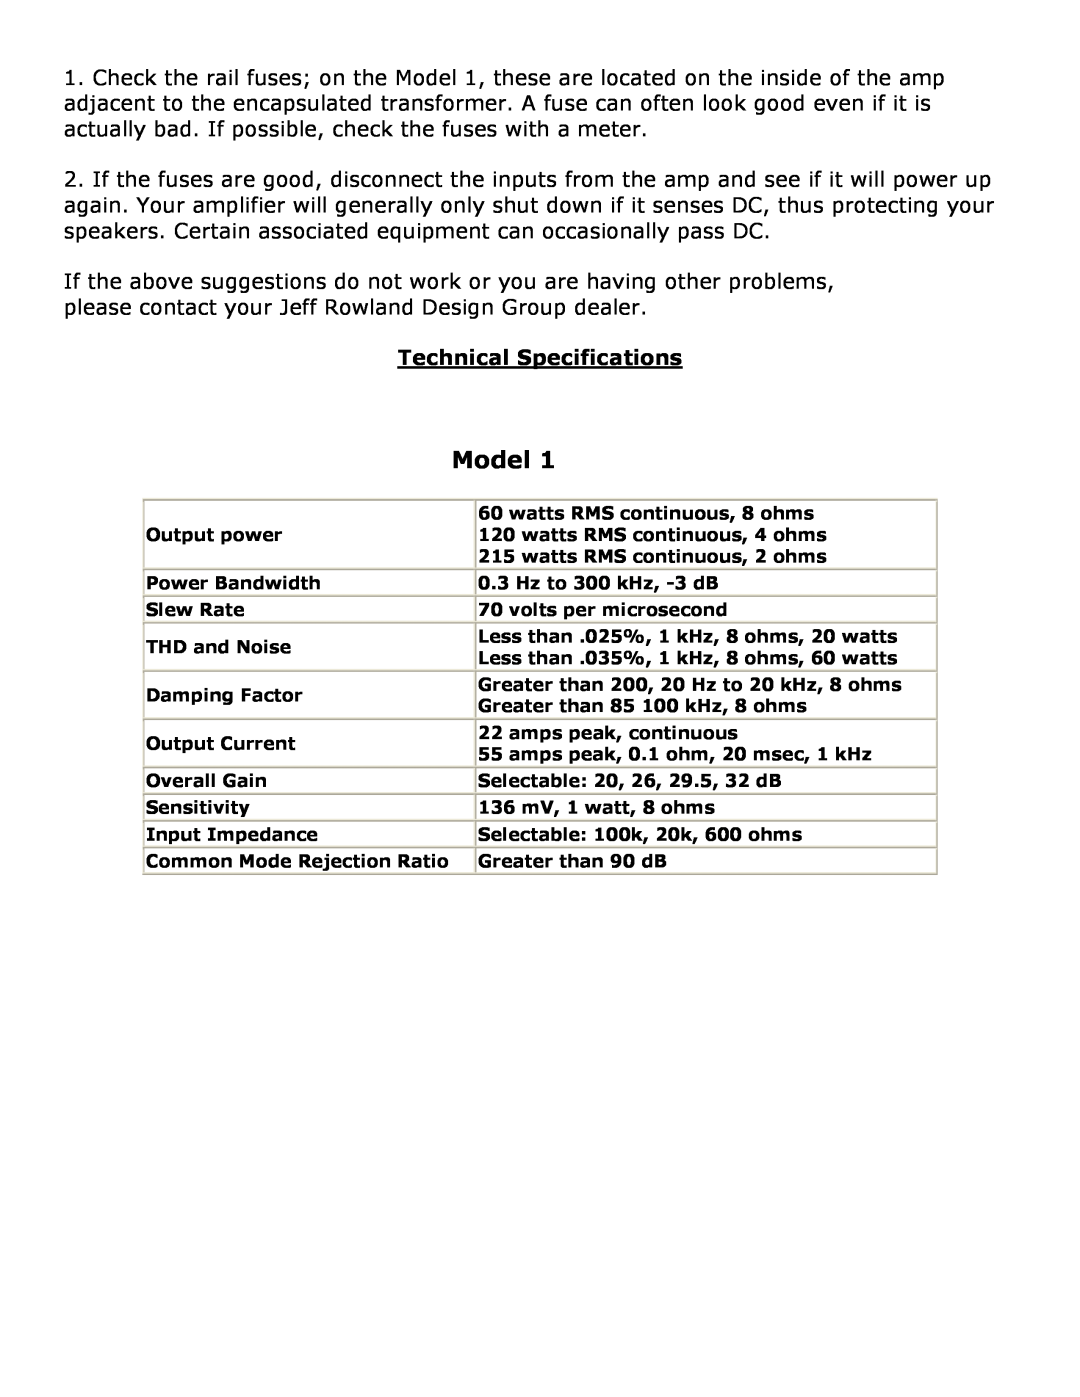 Jeff Rowland Design Group 1 owner manual Technical Specifications, Model 